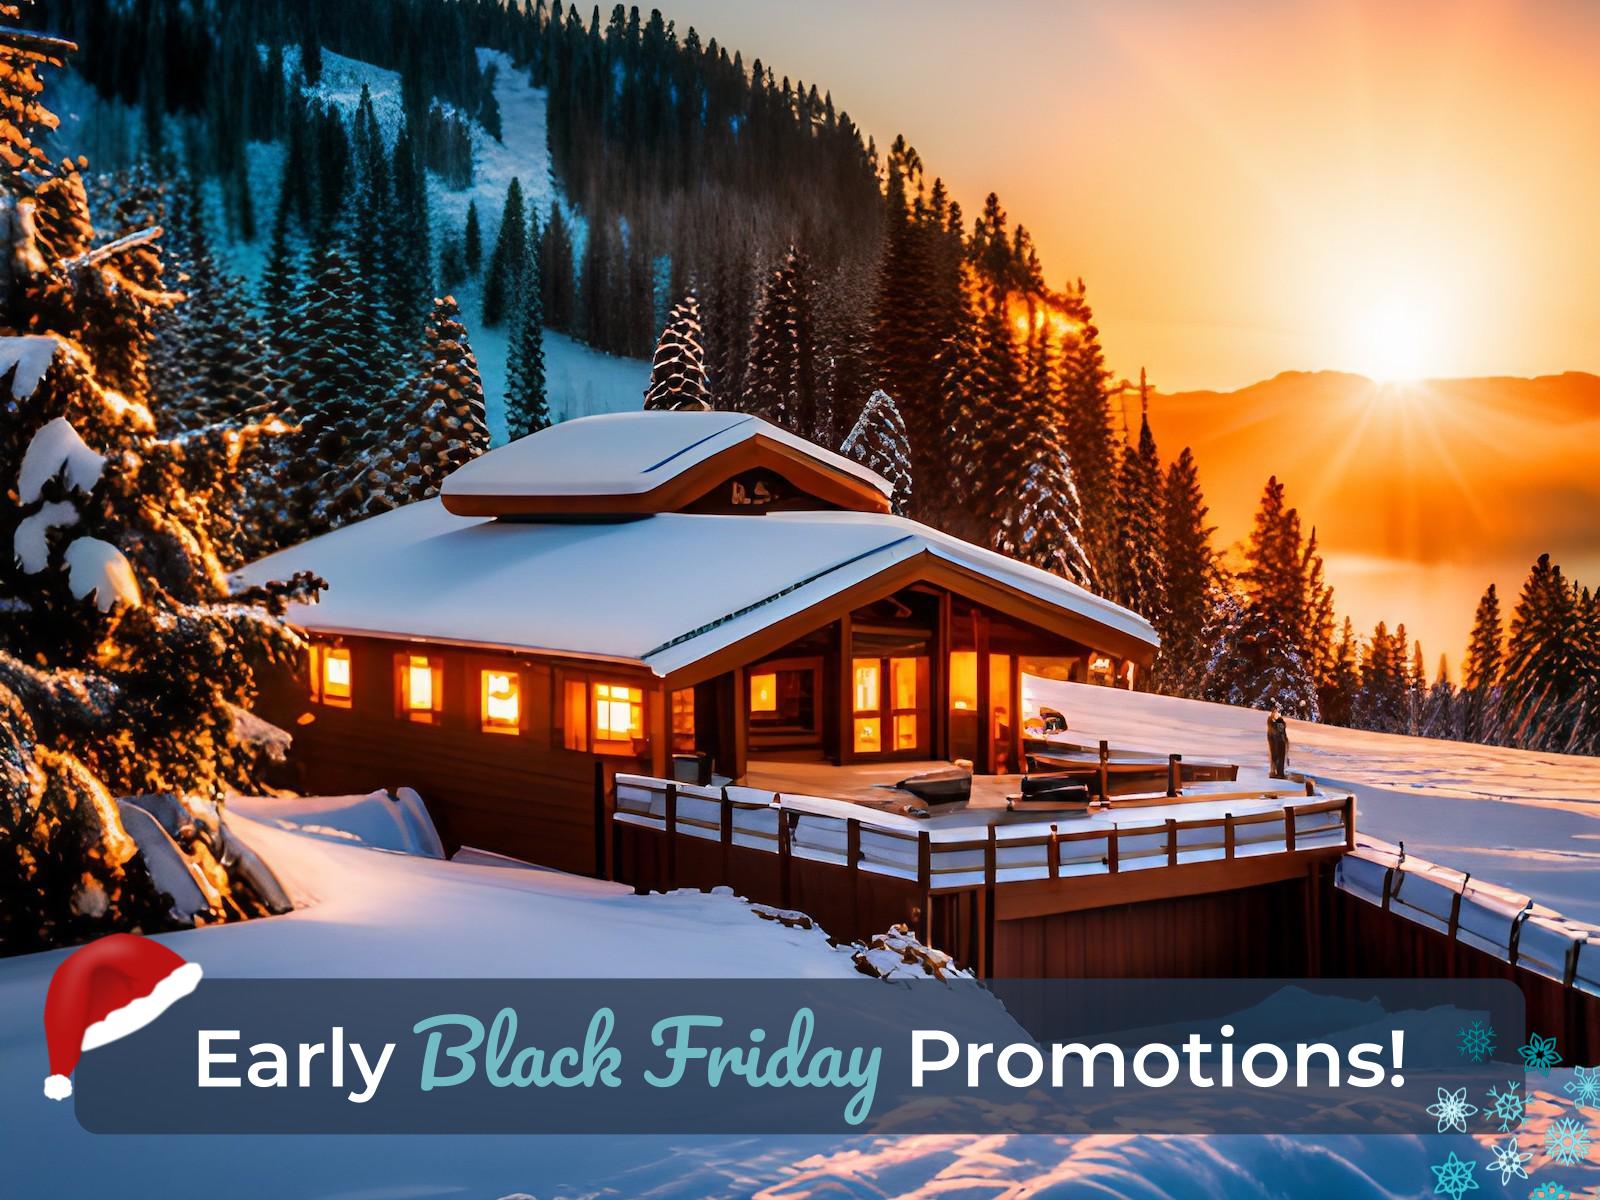 Early Black Friday Promotions